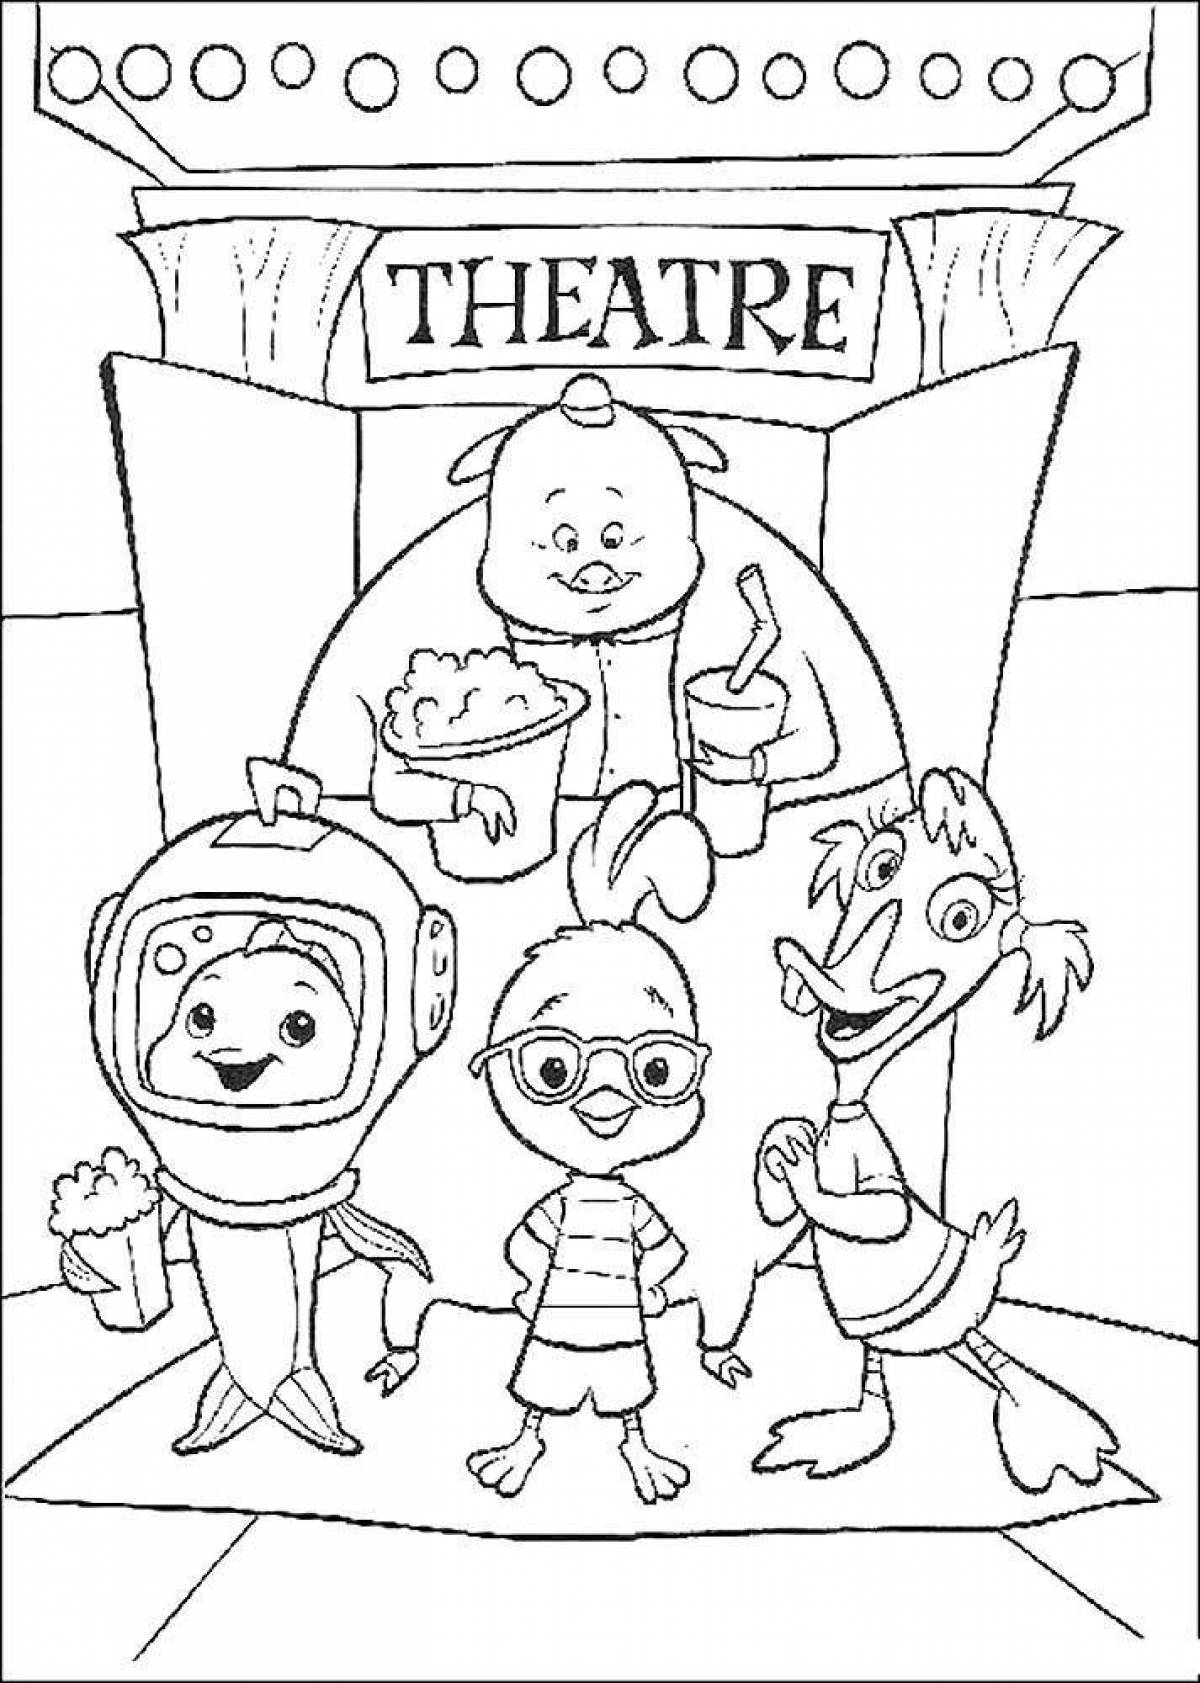 Joyful theater coloring for kids